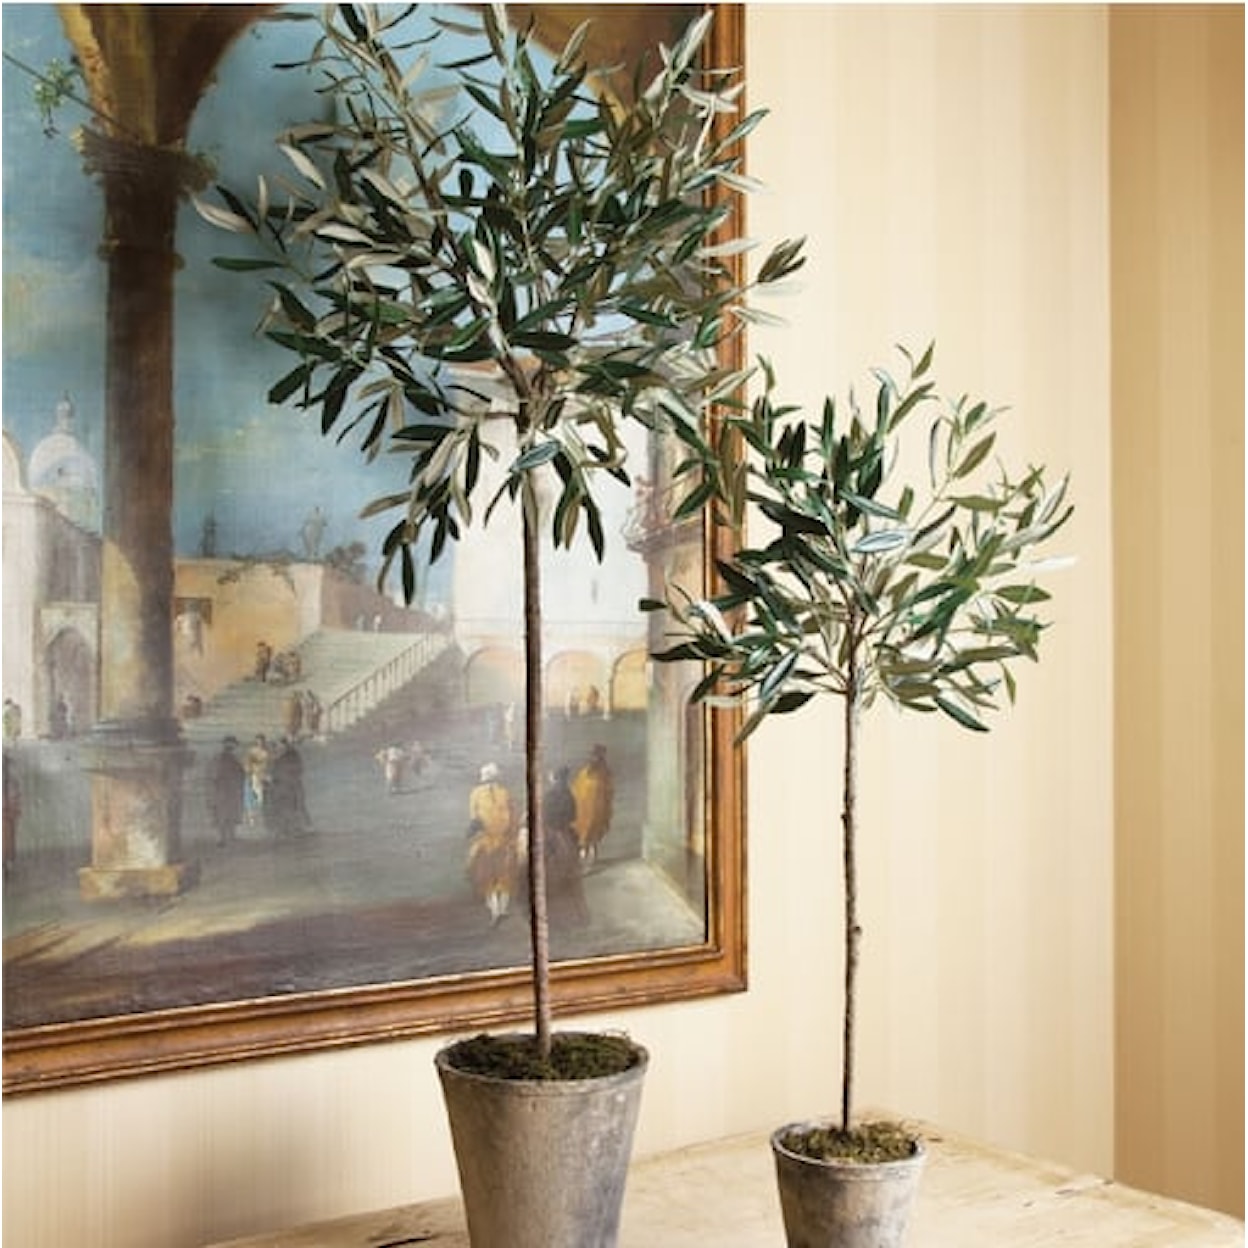 Napa Home & Garden Accessories 30" Potted Olive Tree